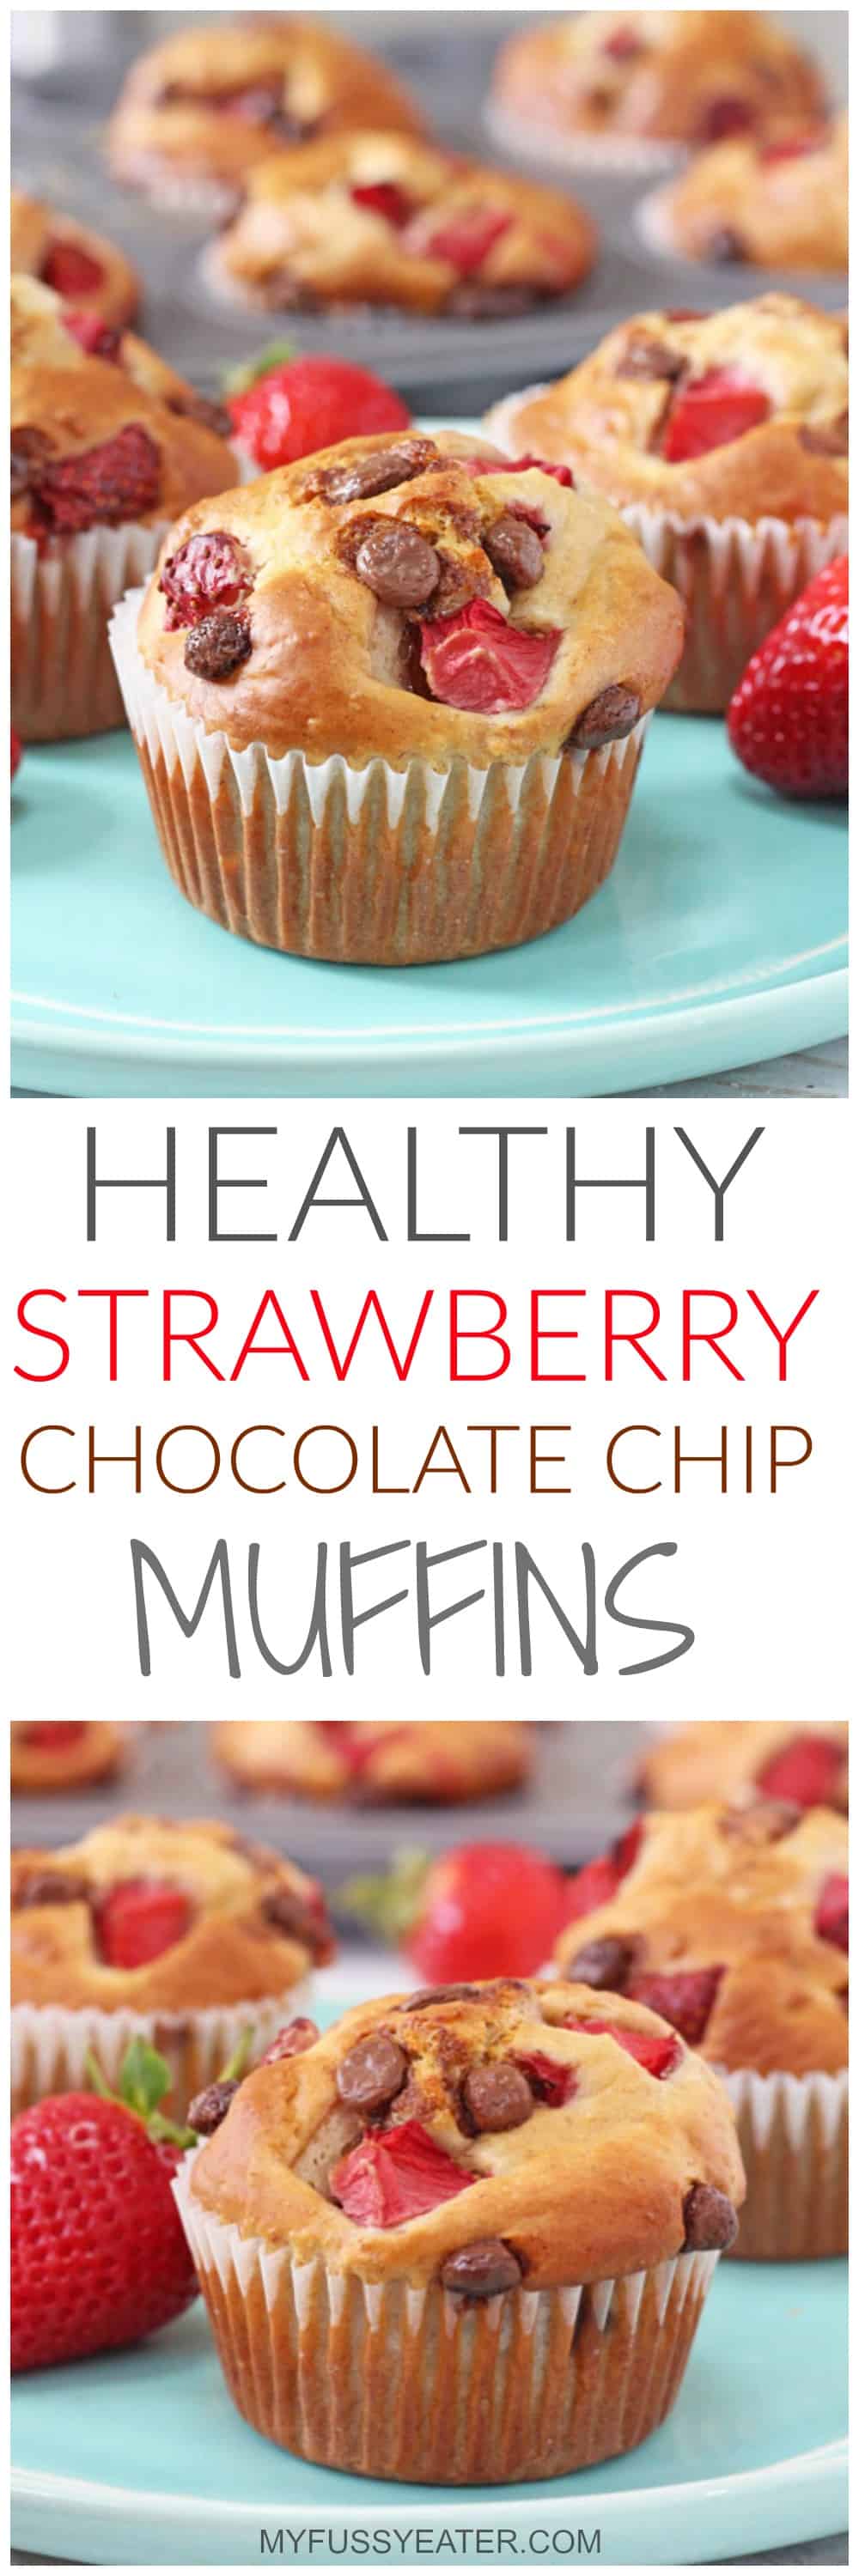 hese Healthy Strawberry & Chocolate Chip Muffins are packed full of oats, banana, greek yogurt and honey and take just a couple of minutes to whip up in a blender or food processor.